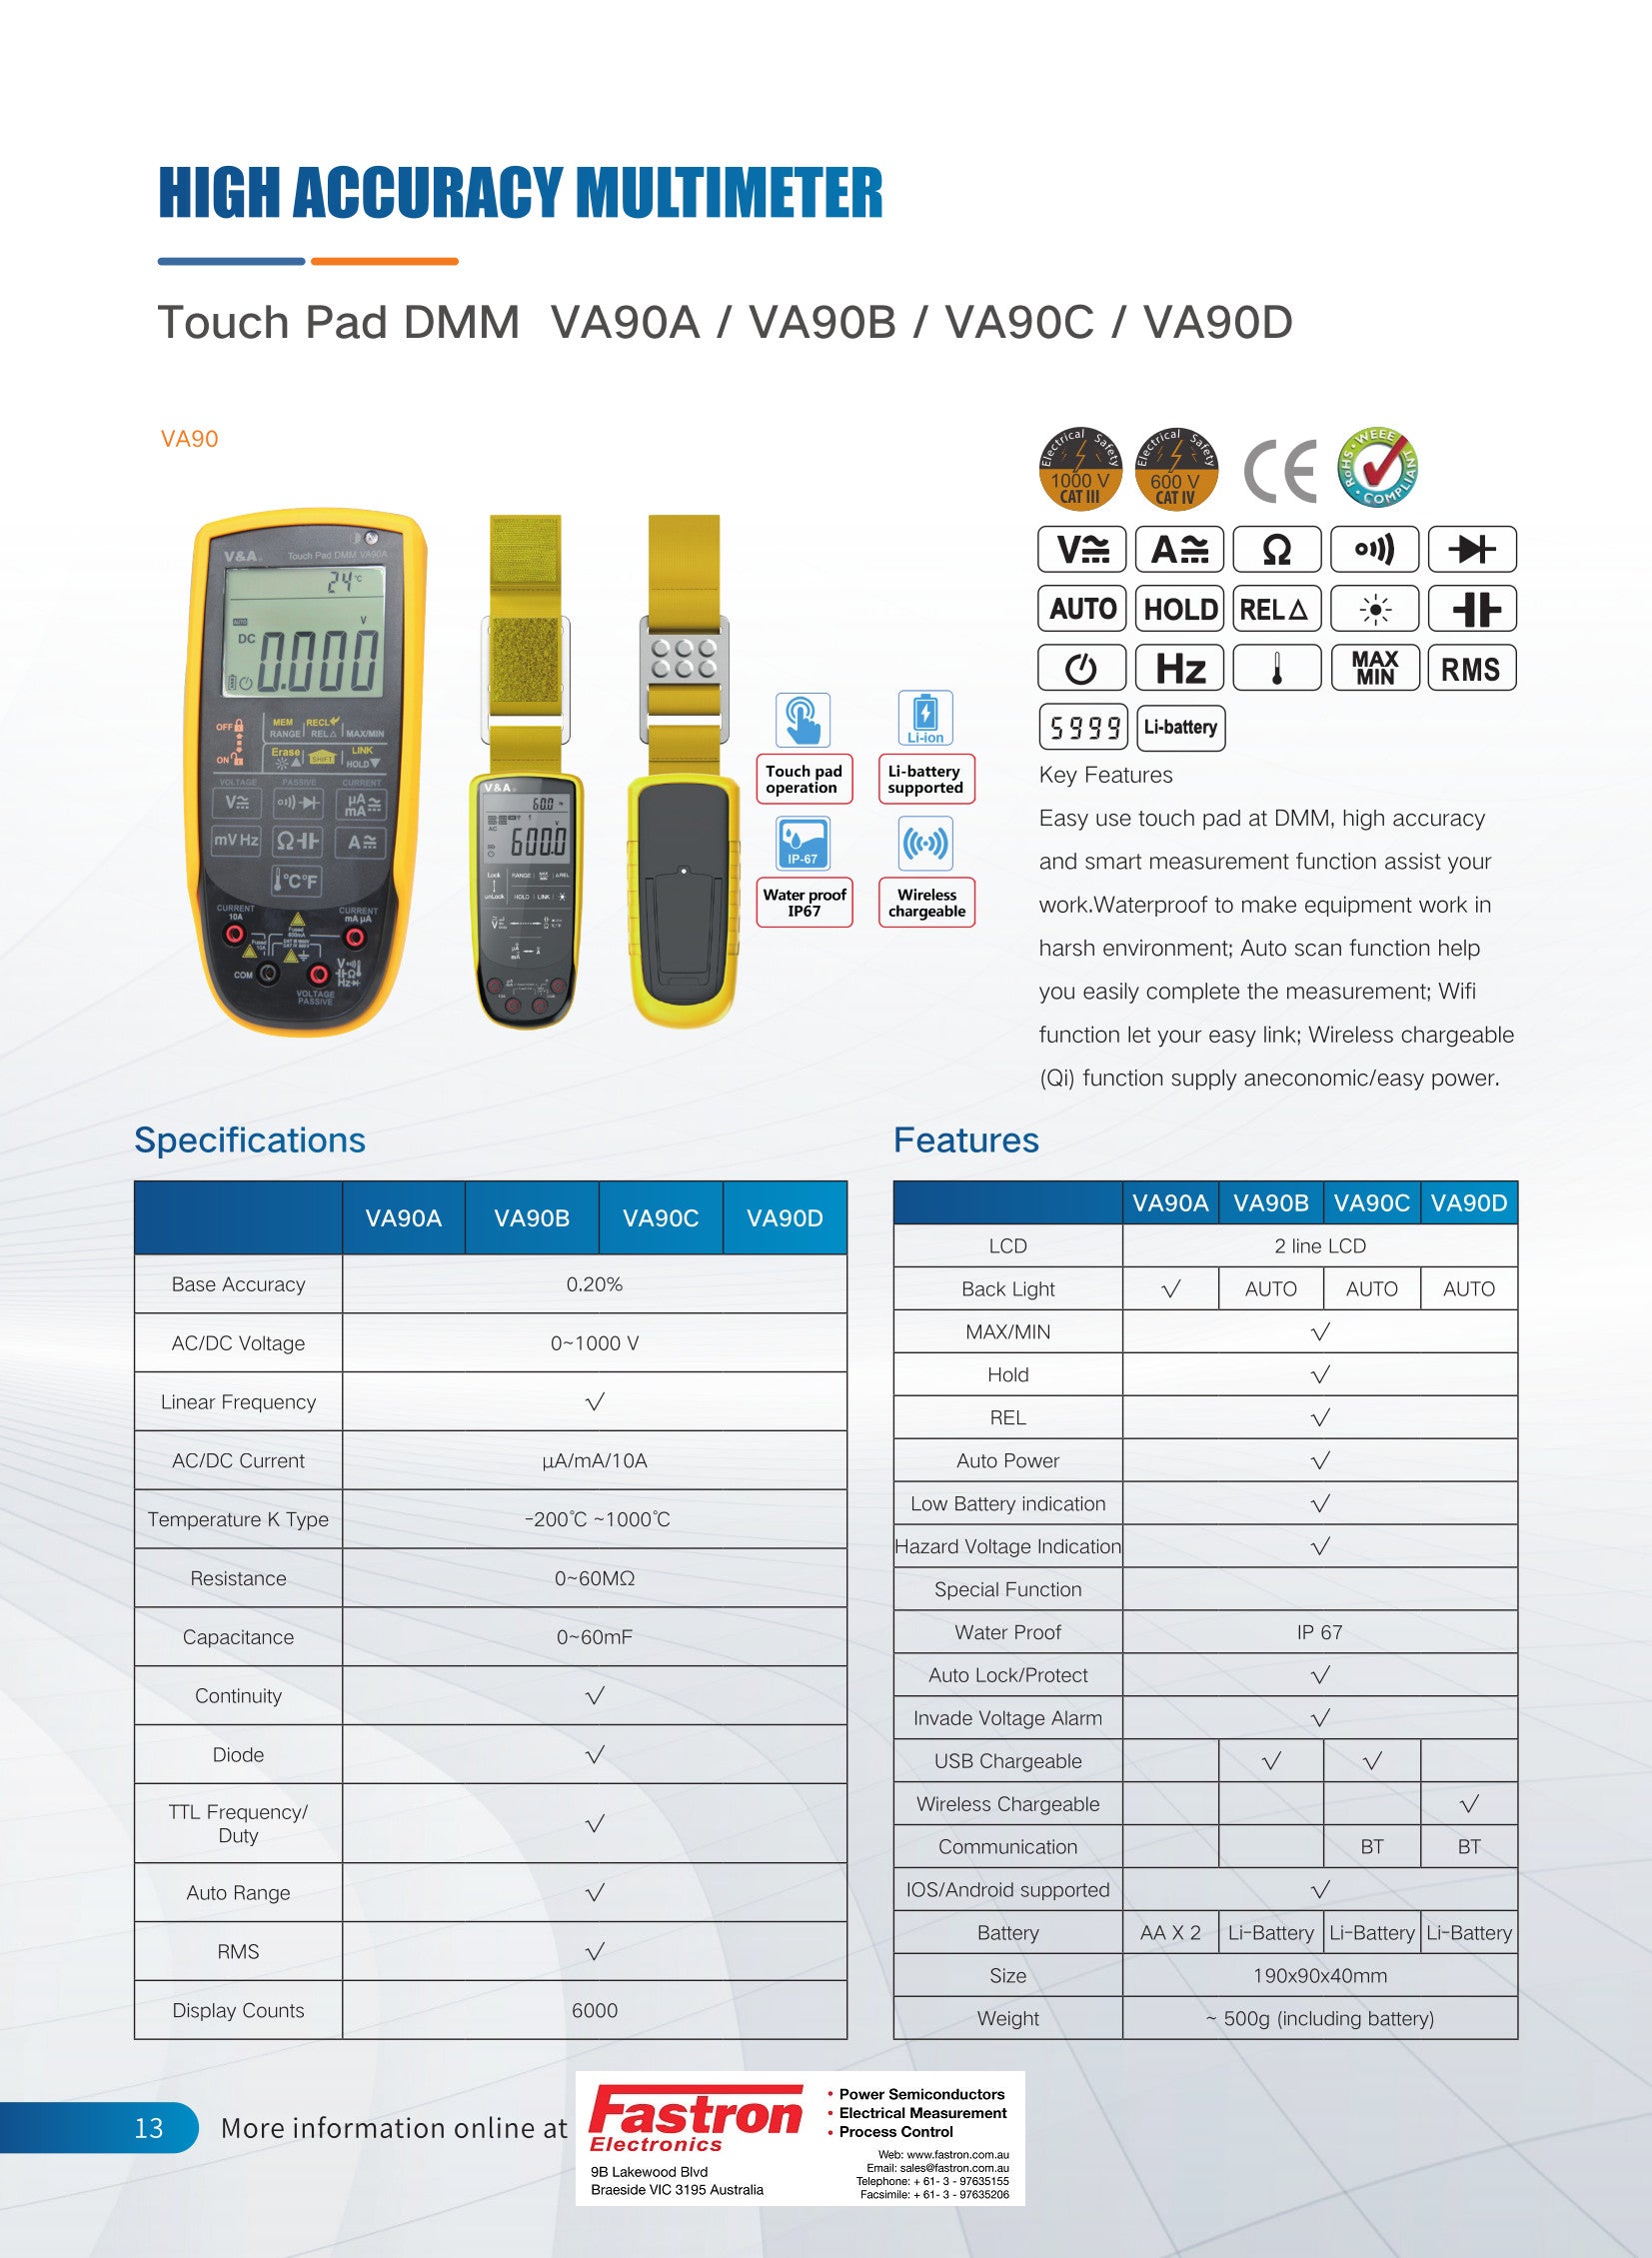 VA90B, Touch Pad Multimeter For Average RMS, 0-1000V AC/DC, Linear Frequency, AC/DC uA/mA/10A, -200 to 1000 Deg C, 0- 60 MOhm, 0-60mF, Diode Test, Continuity Test